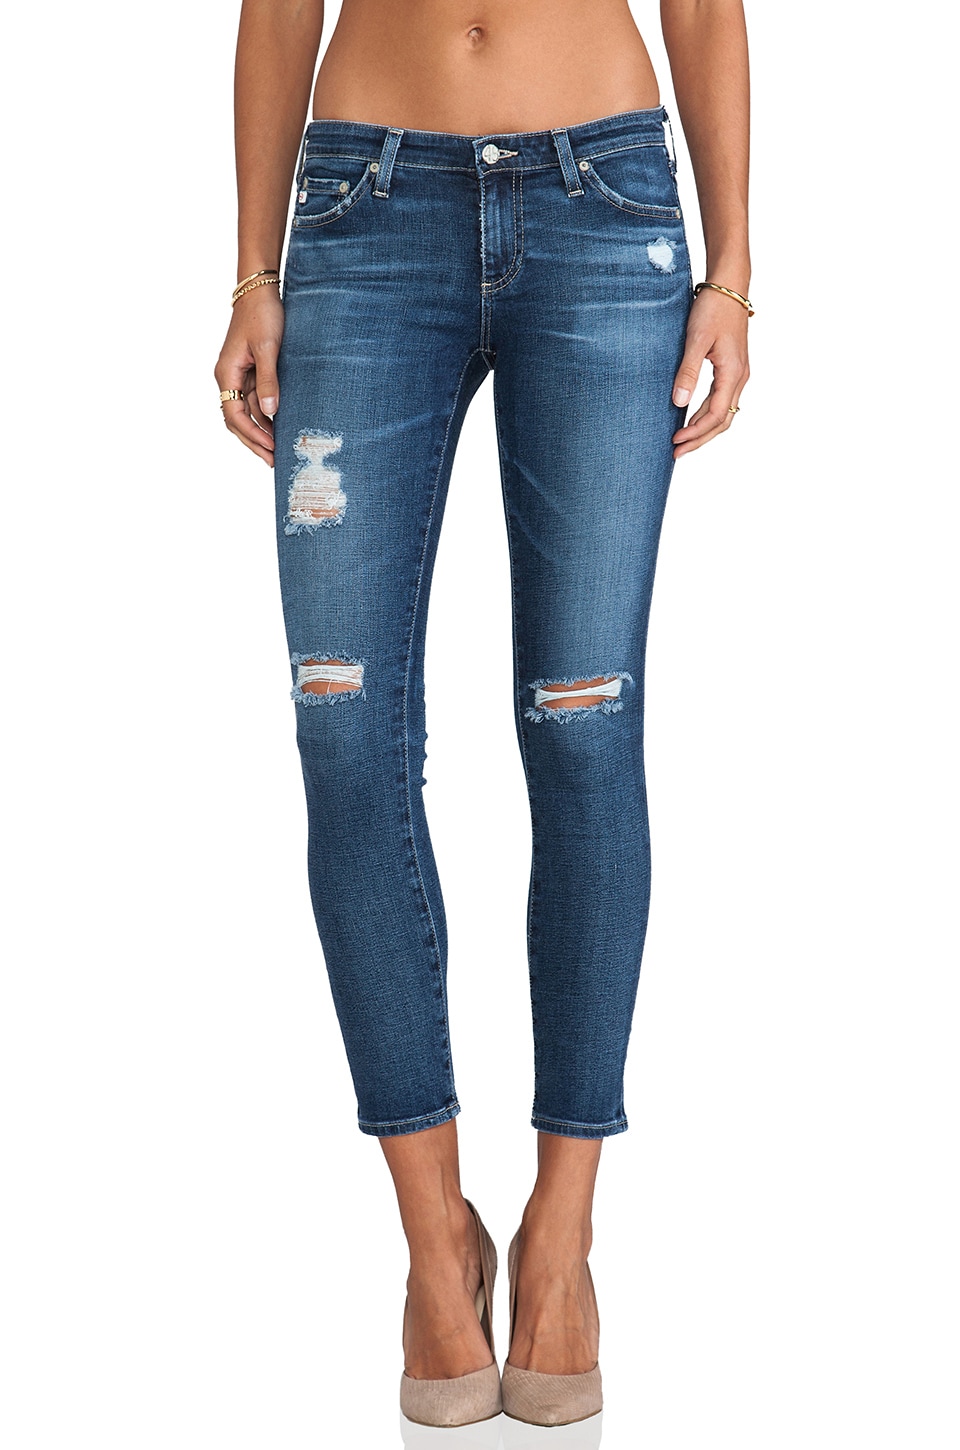 AG The Legging Distressed Ankle Jeans, 11 Years Swap Meet in 11 Years ...